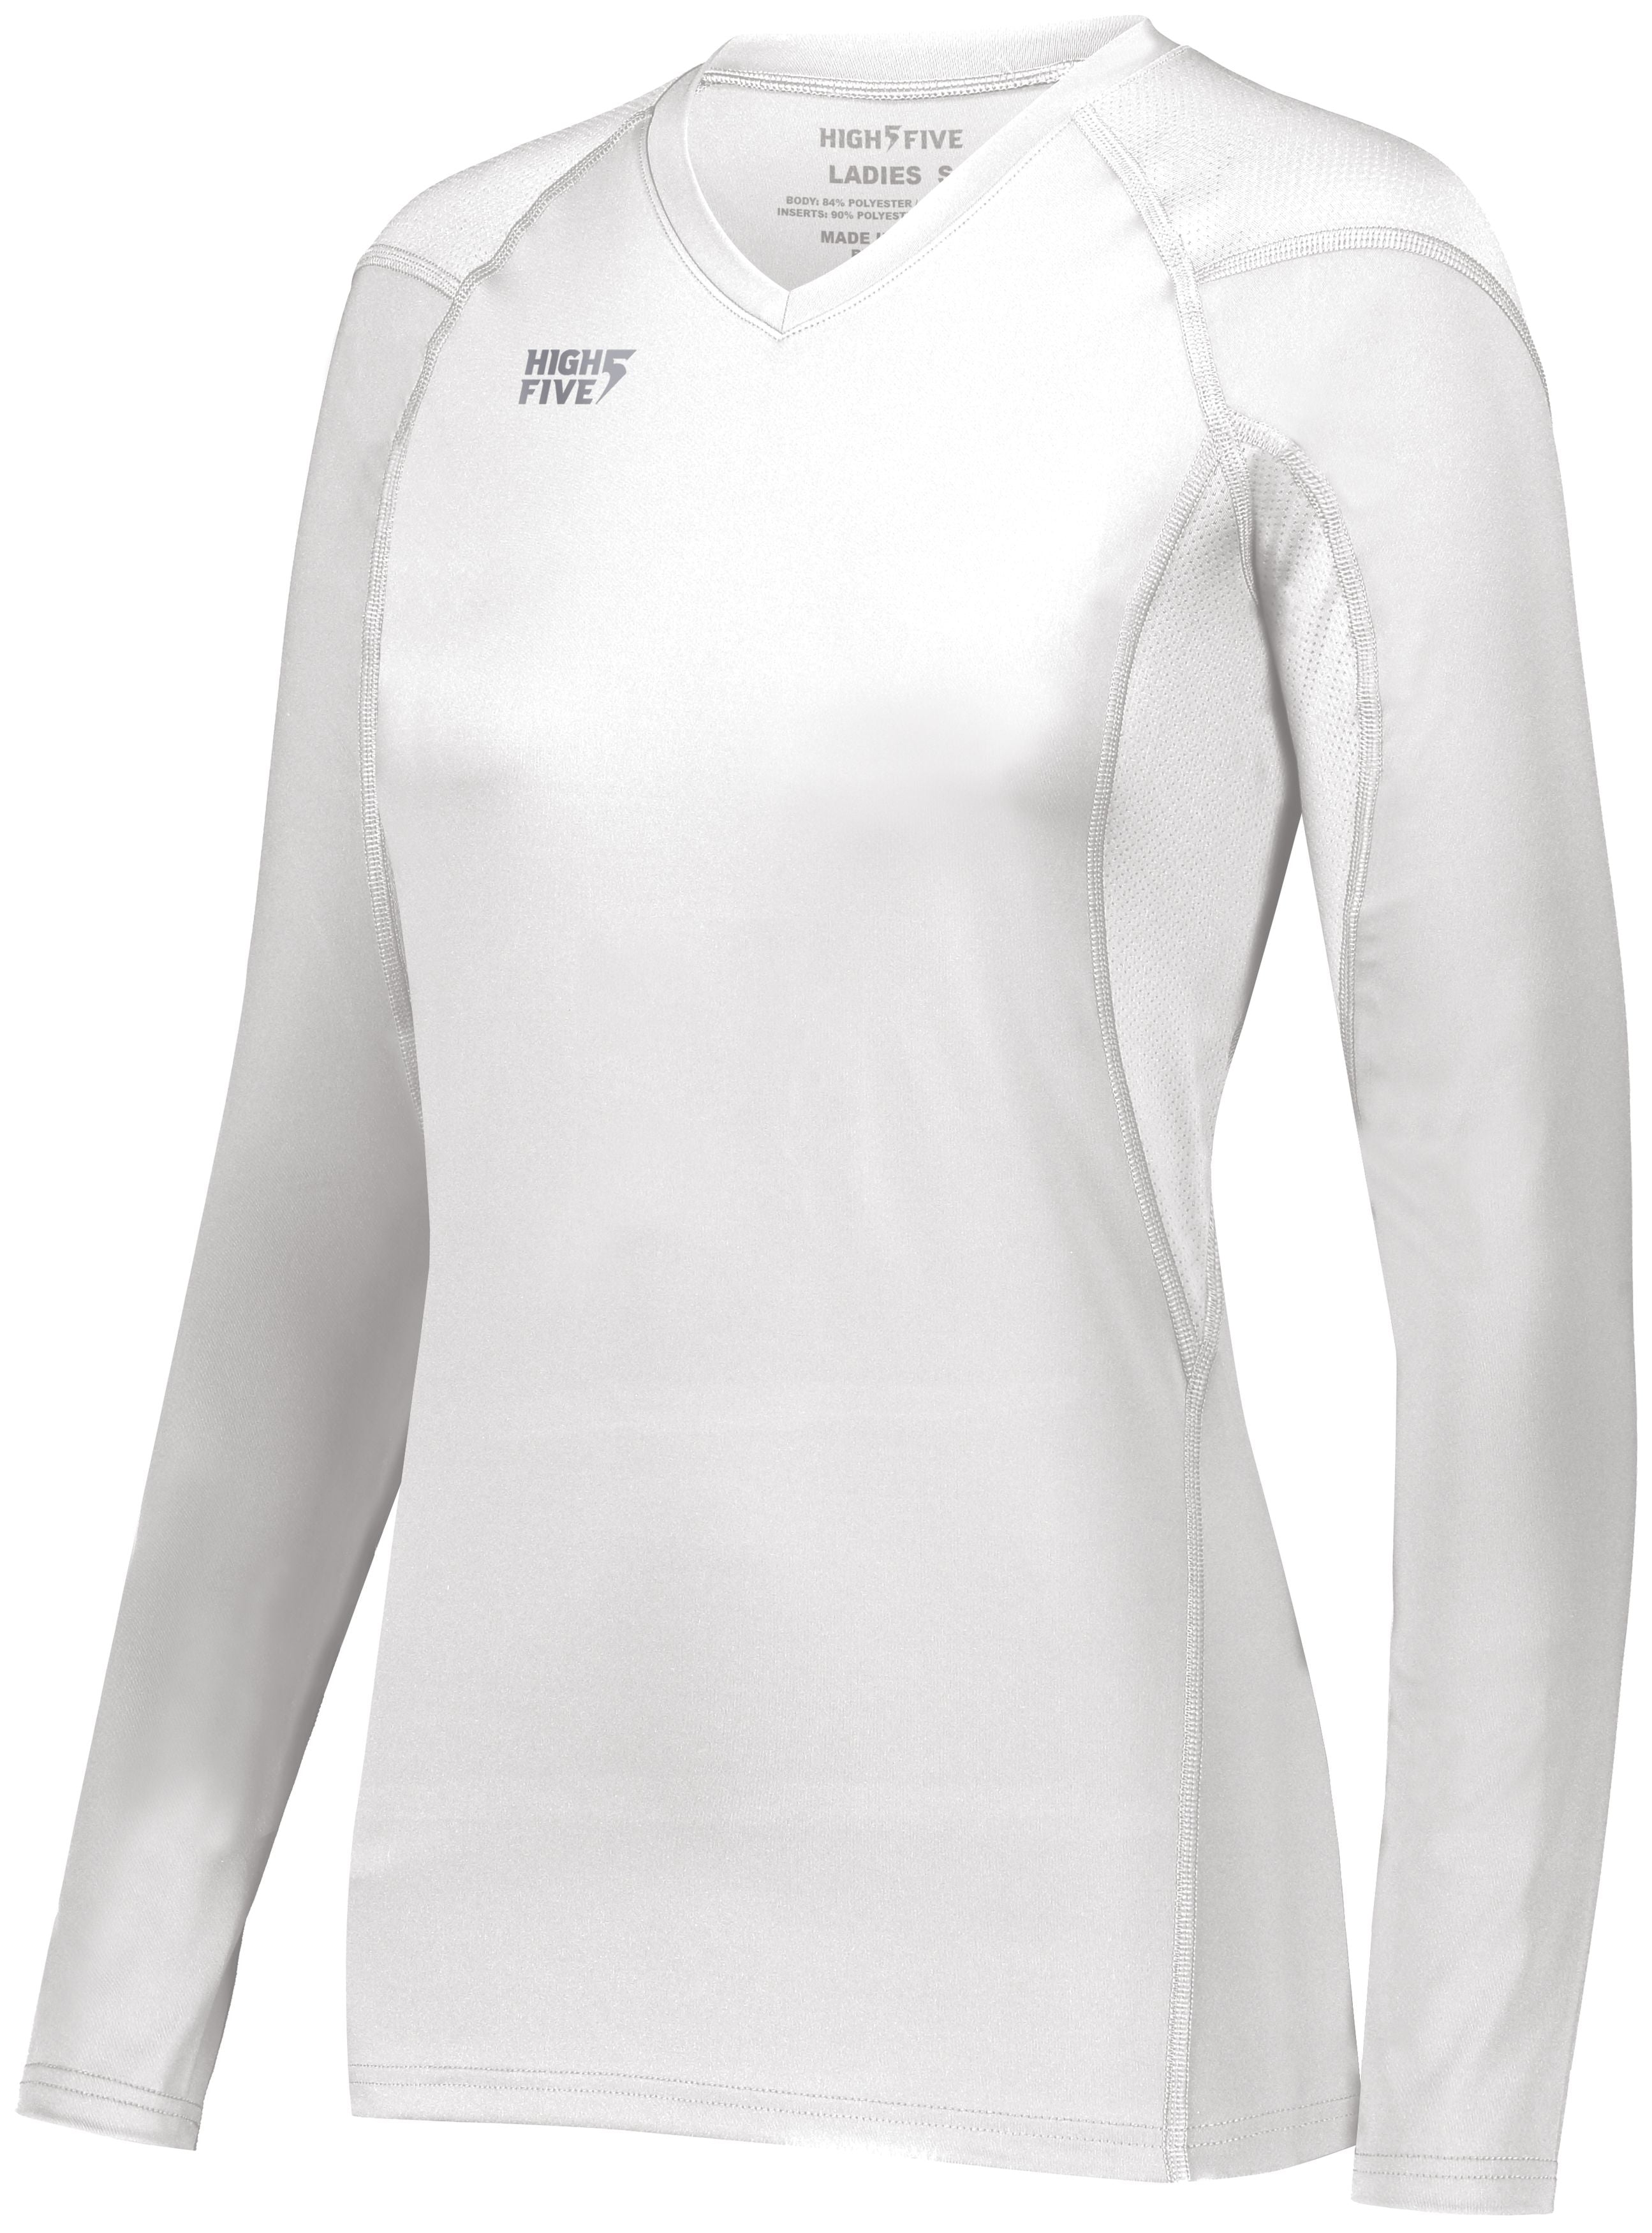 High 5 Girls Truhit Long Sleeve Jersey in White  -Part of the Girls, High5-Products, Volleyball, Girls-Jersey, Shirts product lines at KanaleyCreations.com